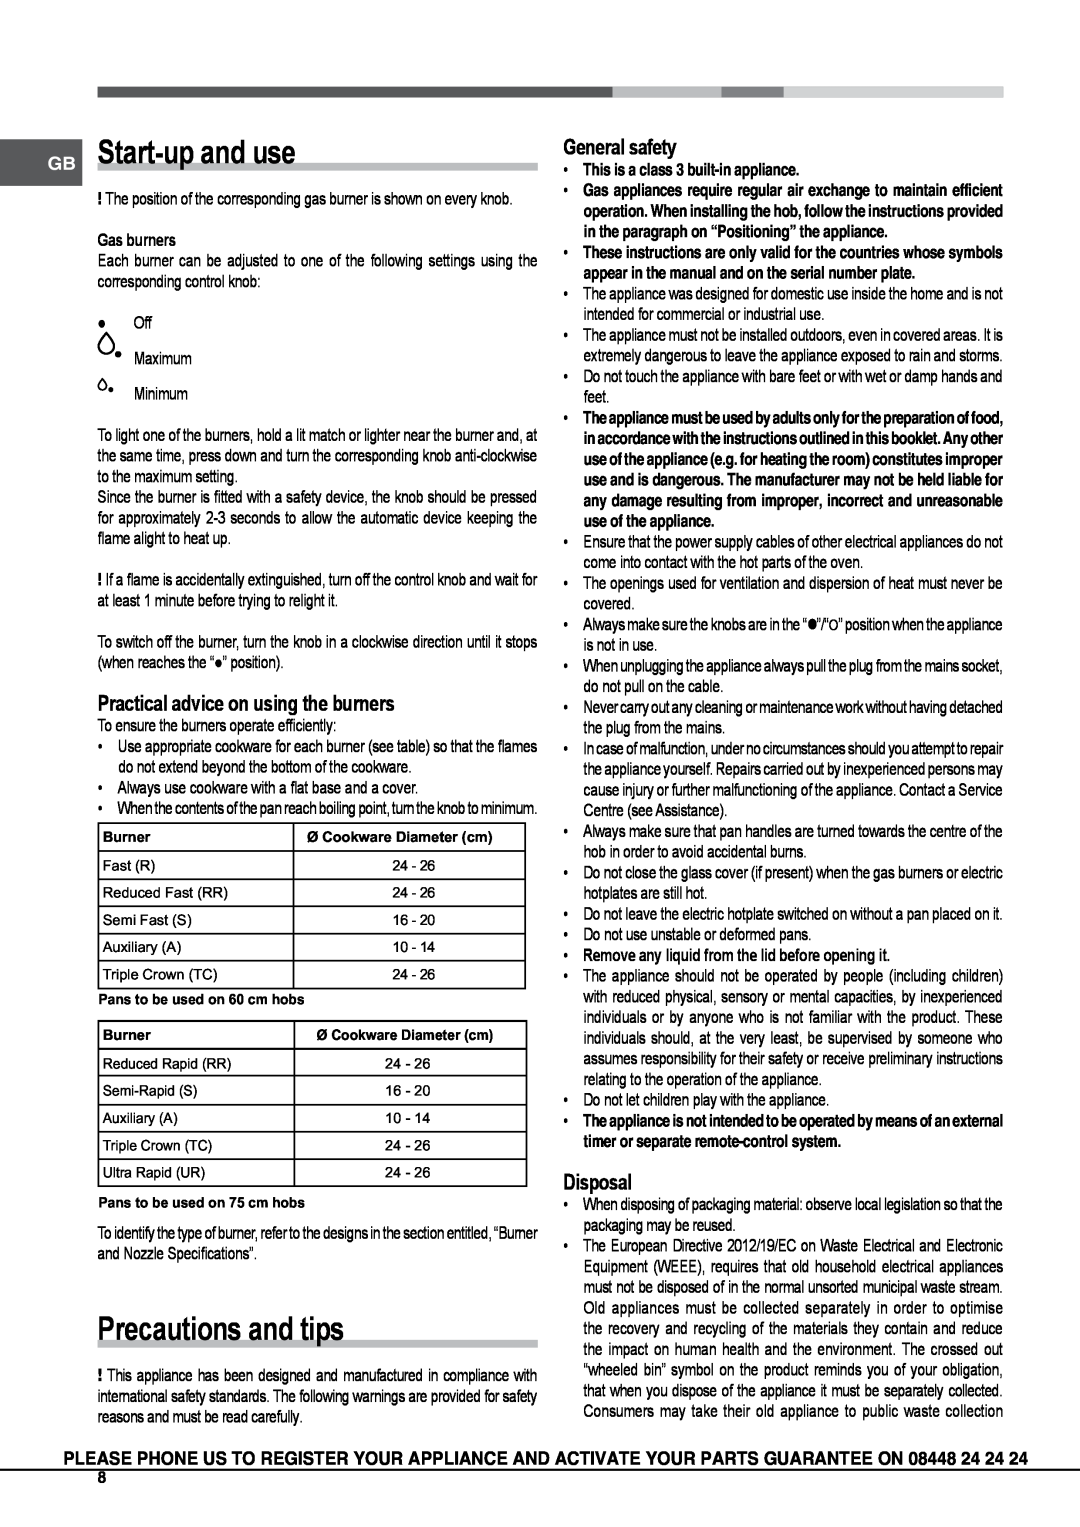 Hotpoint GC640IX GB Start-upand use, Precautions and tips, Practical advice on using the burners, General safety, Disposal 